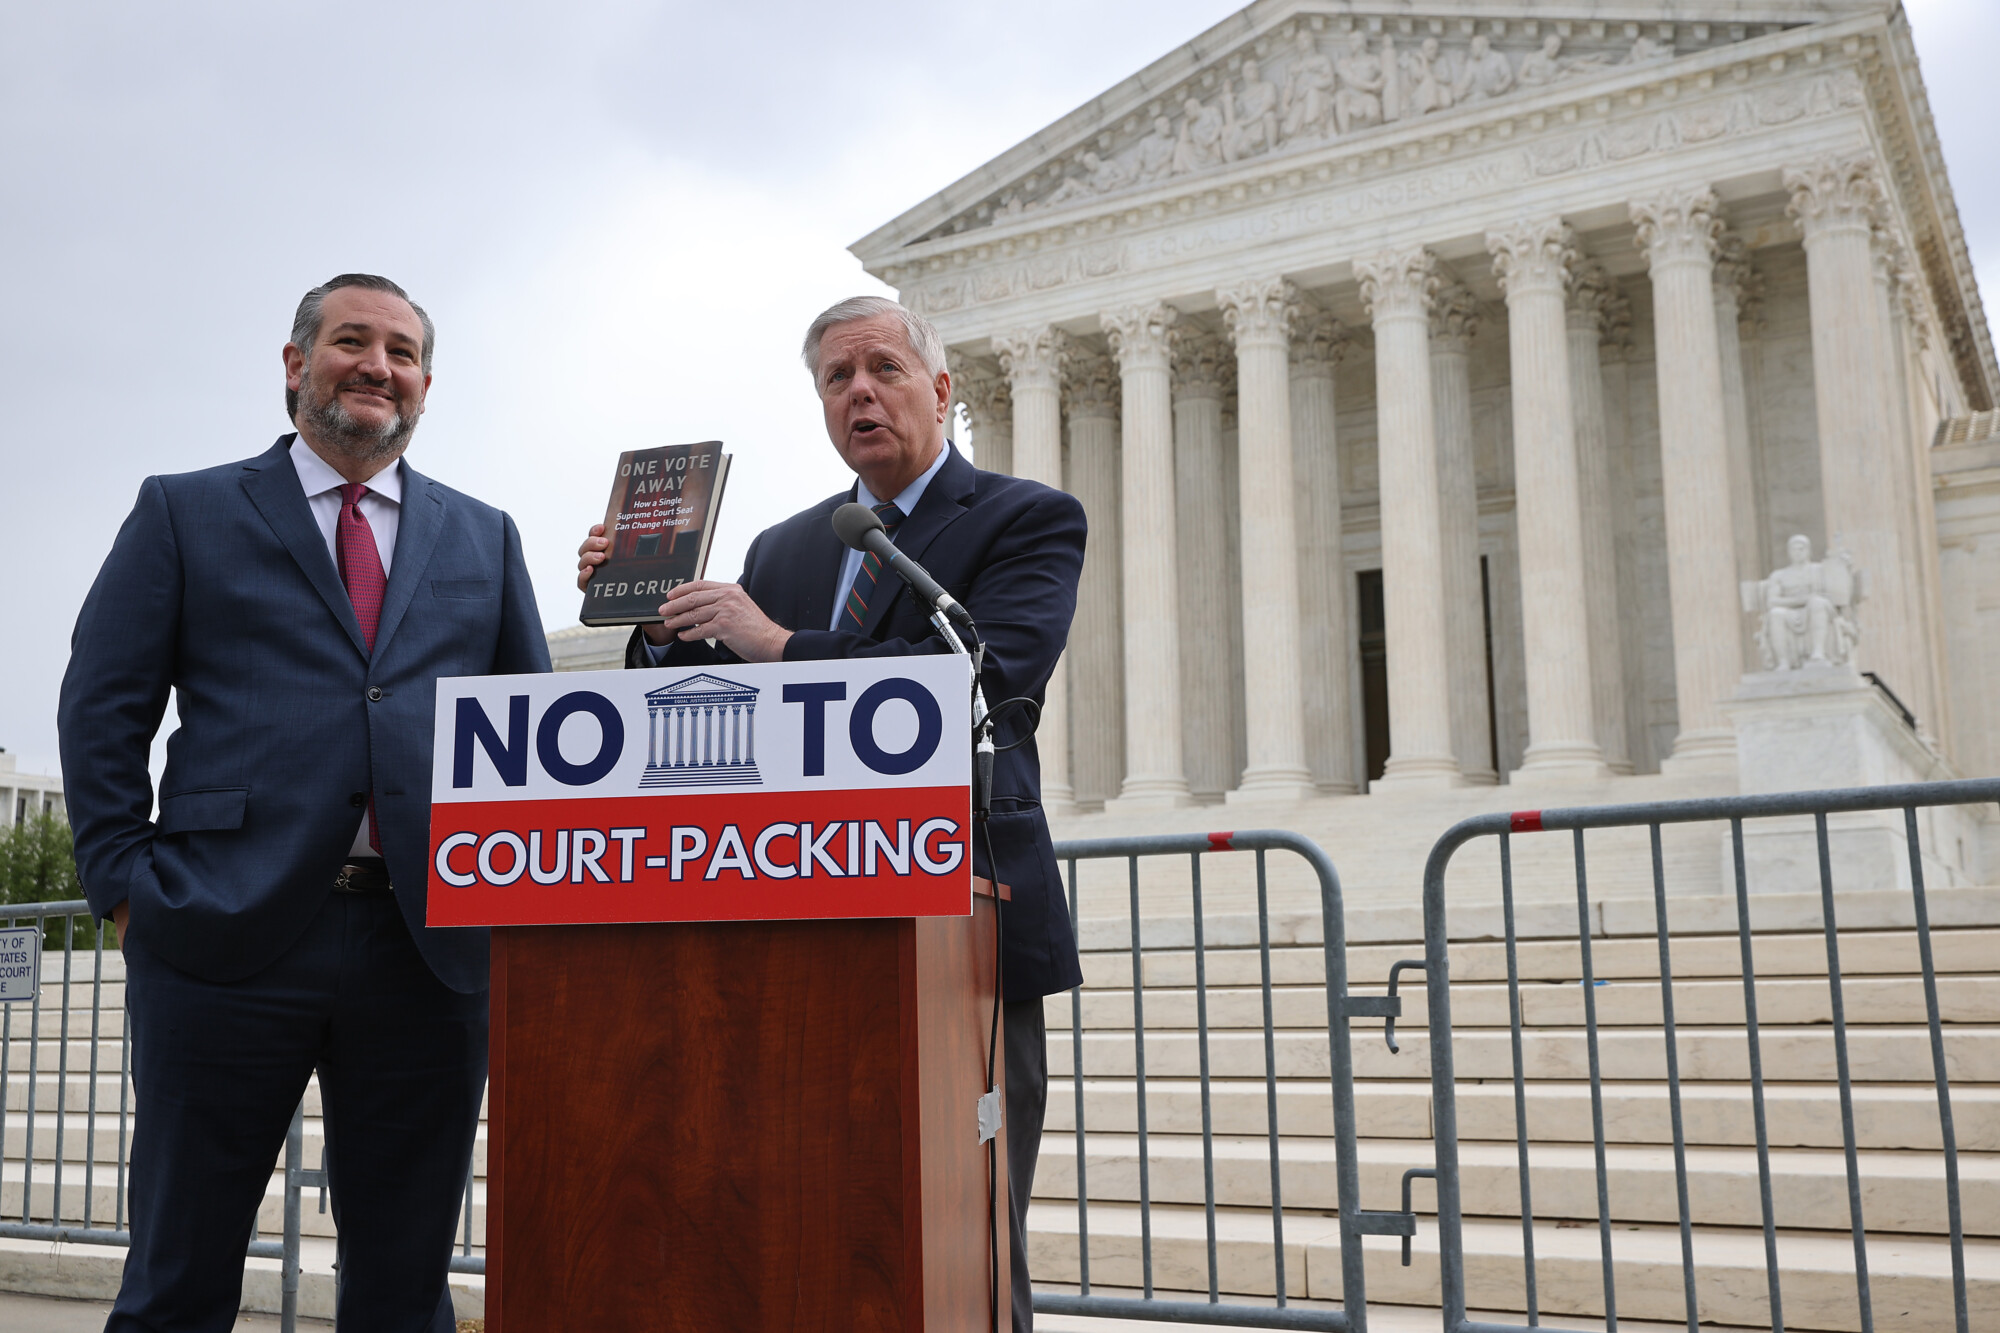 20 State Attorneys General Oppose Supreme Court Packing